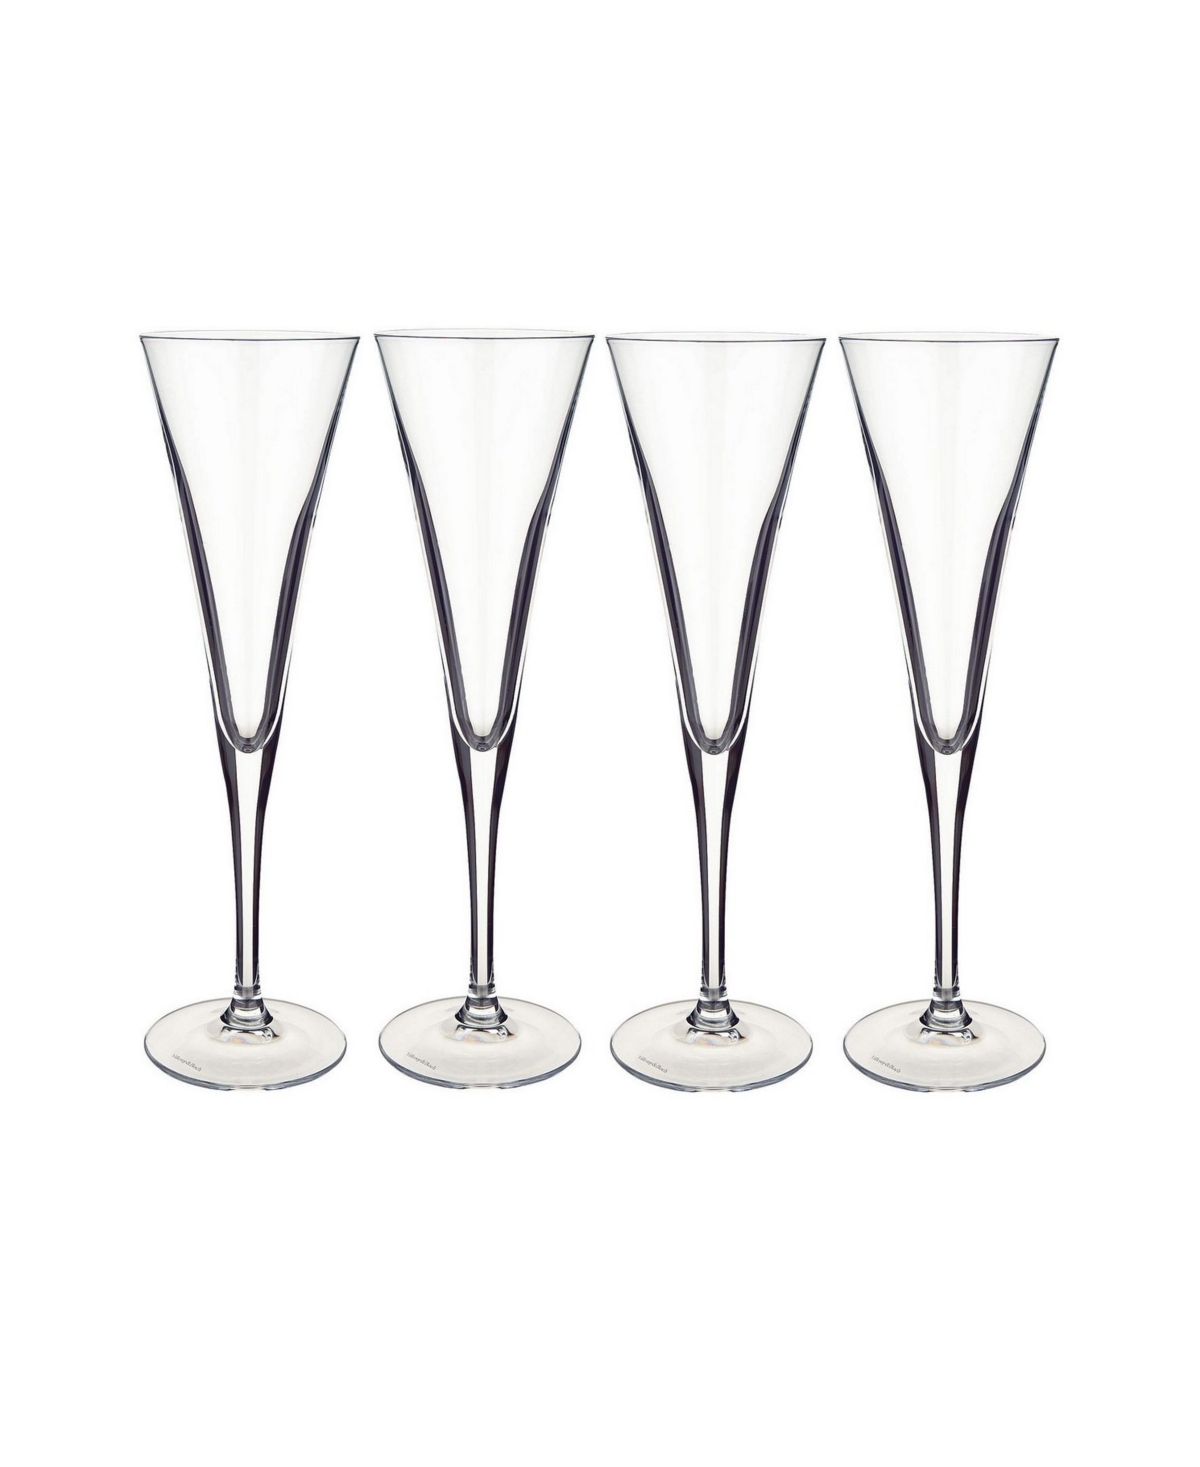 Villeroy & Boch Purismo Special Flute Champagne Glass, Set of 4